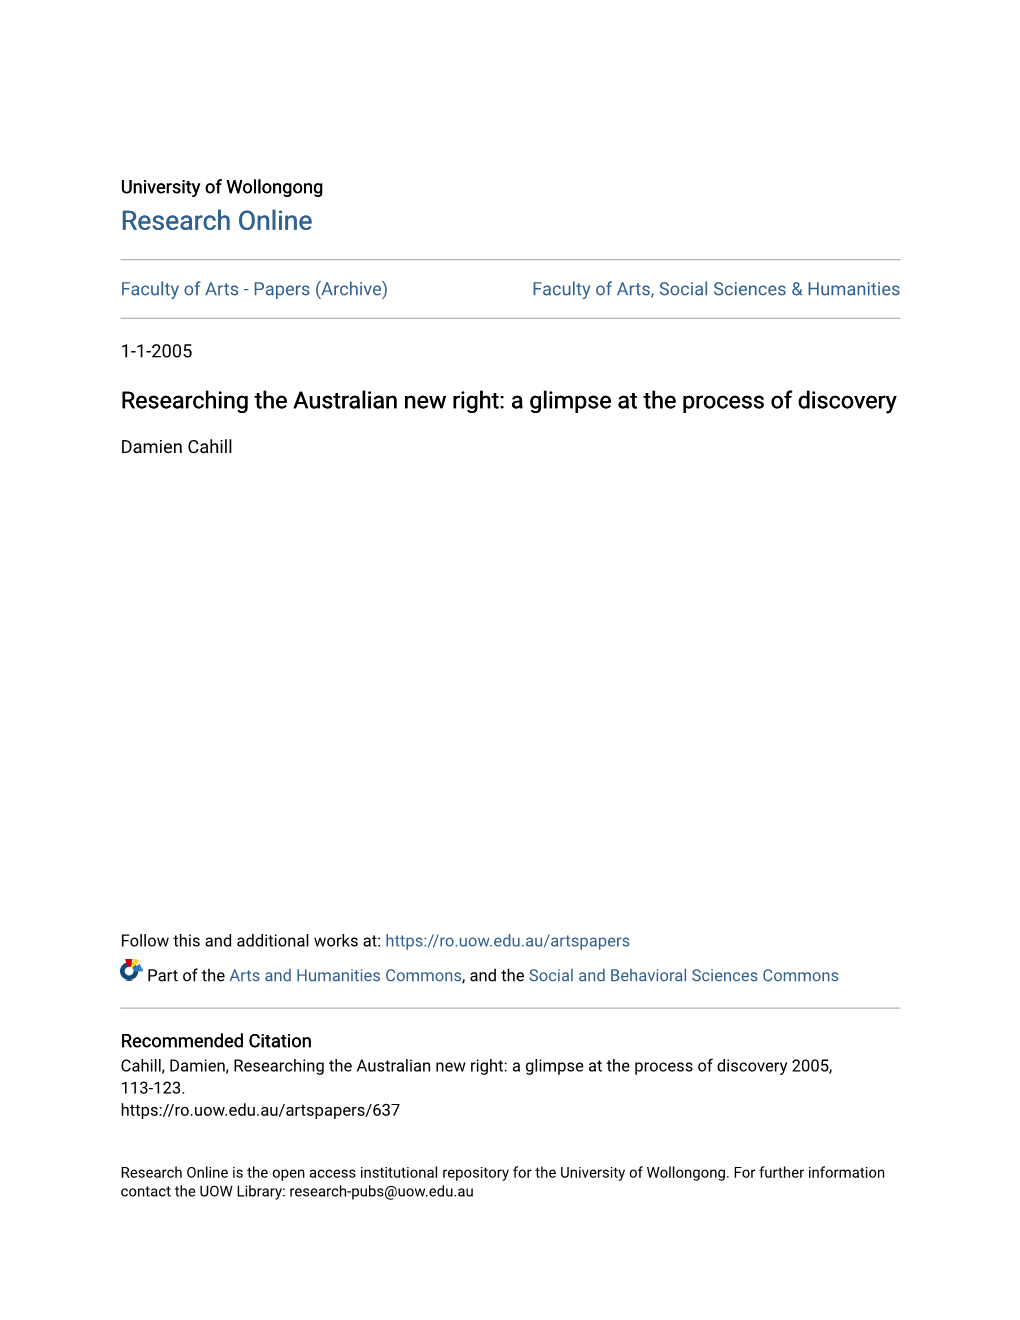 Researching the Australian New Right: a Glimpse at the Process of Discovery